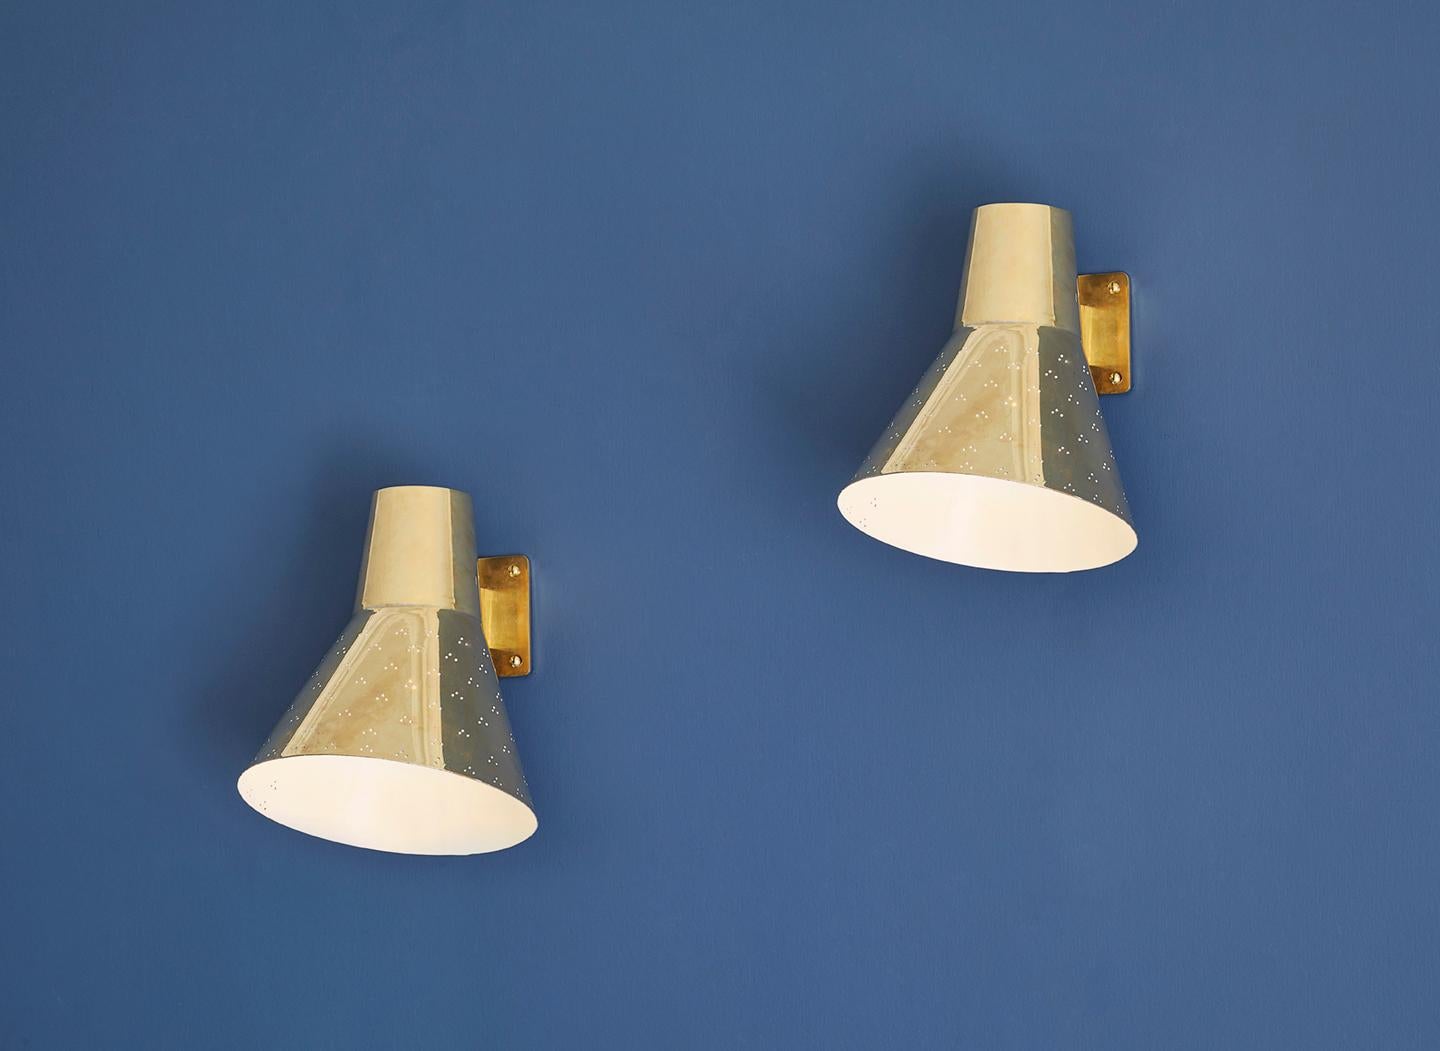 Paavo Tynell
Finland, Vintage

A pair of wall lights in brass with perforated shade. Manufactured by Taito. 

Industrial designer Paavo Tynell (1890-1973) is known as the great pioneer of Finnish lighting design and fondly dubbed as “the man who